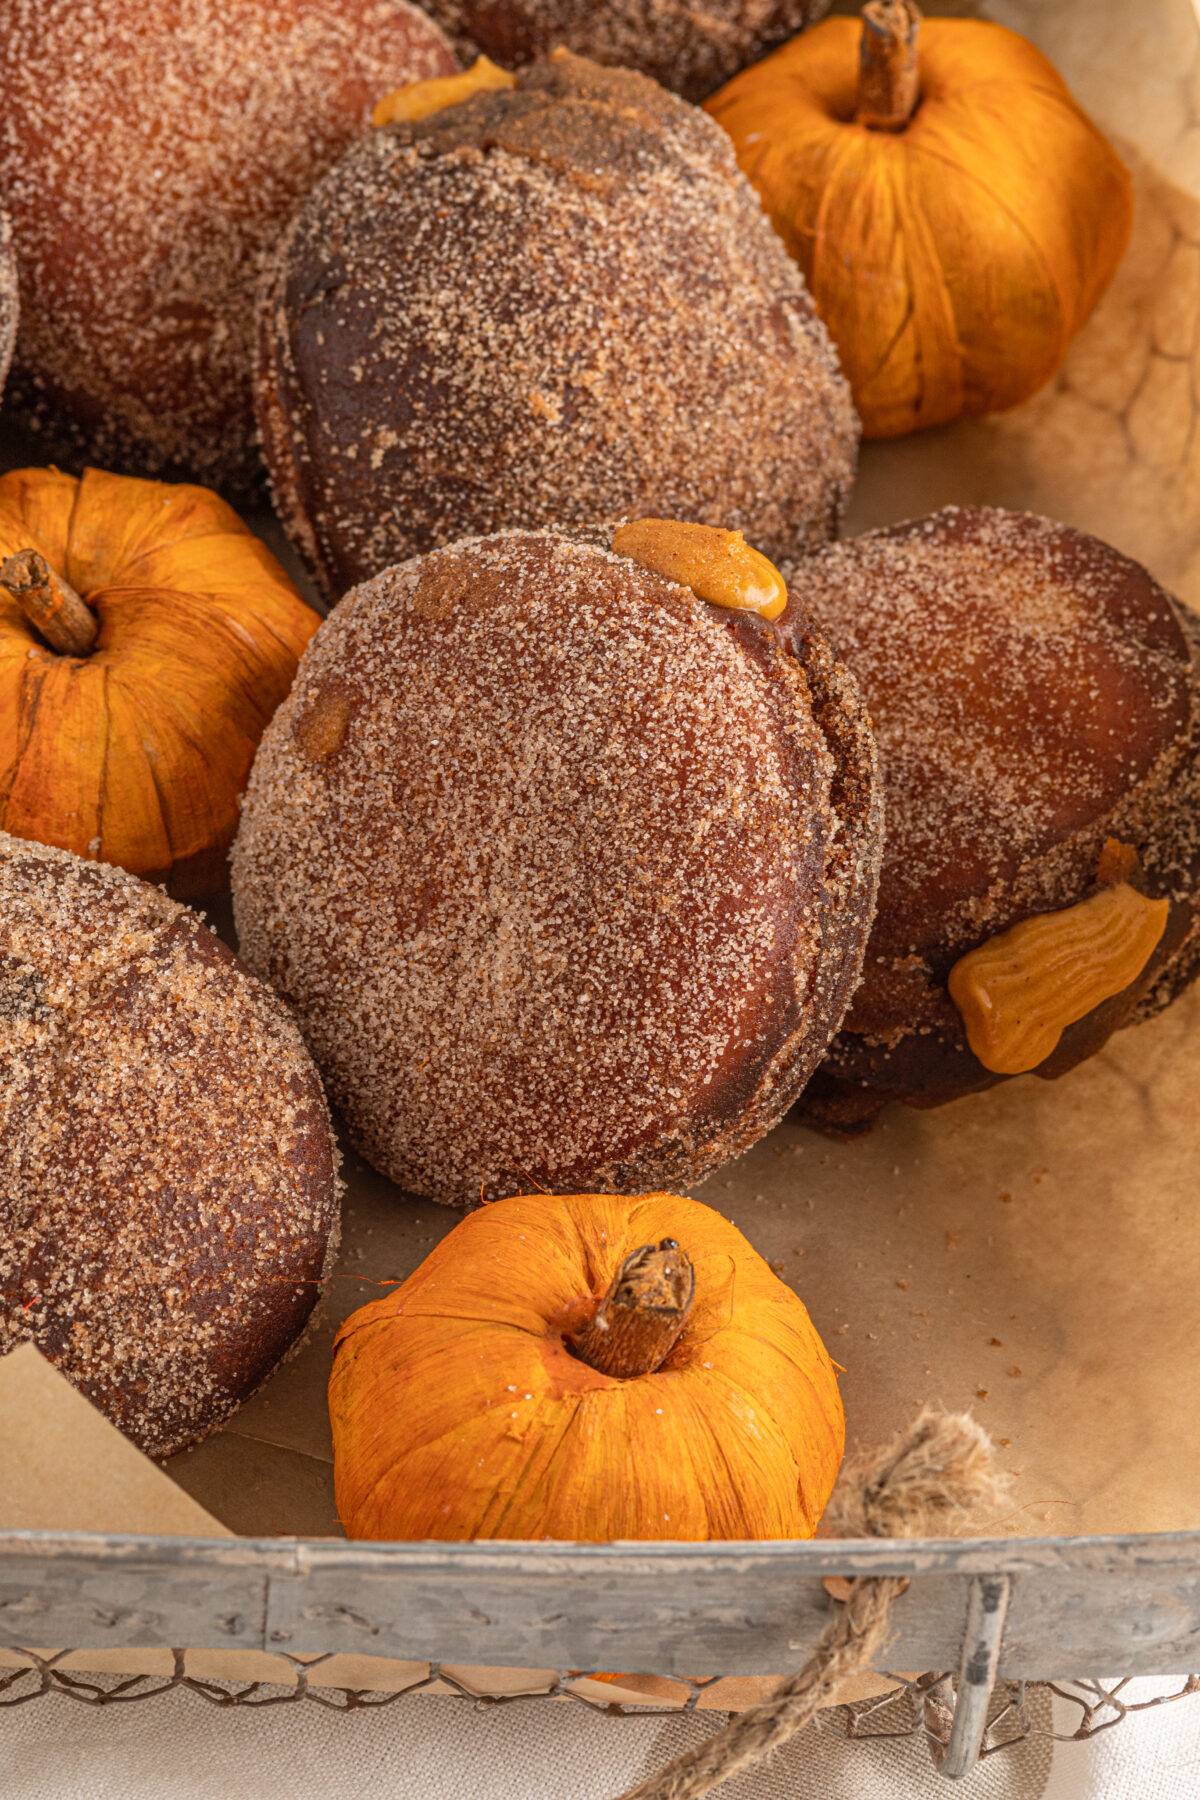 Learn how to make your own delicious pumpkin filled donuts that are perfect for an autumn afternoon snack or a festive Thanksgiving treat!